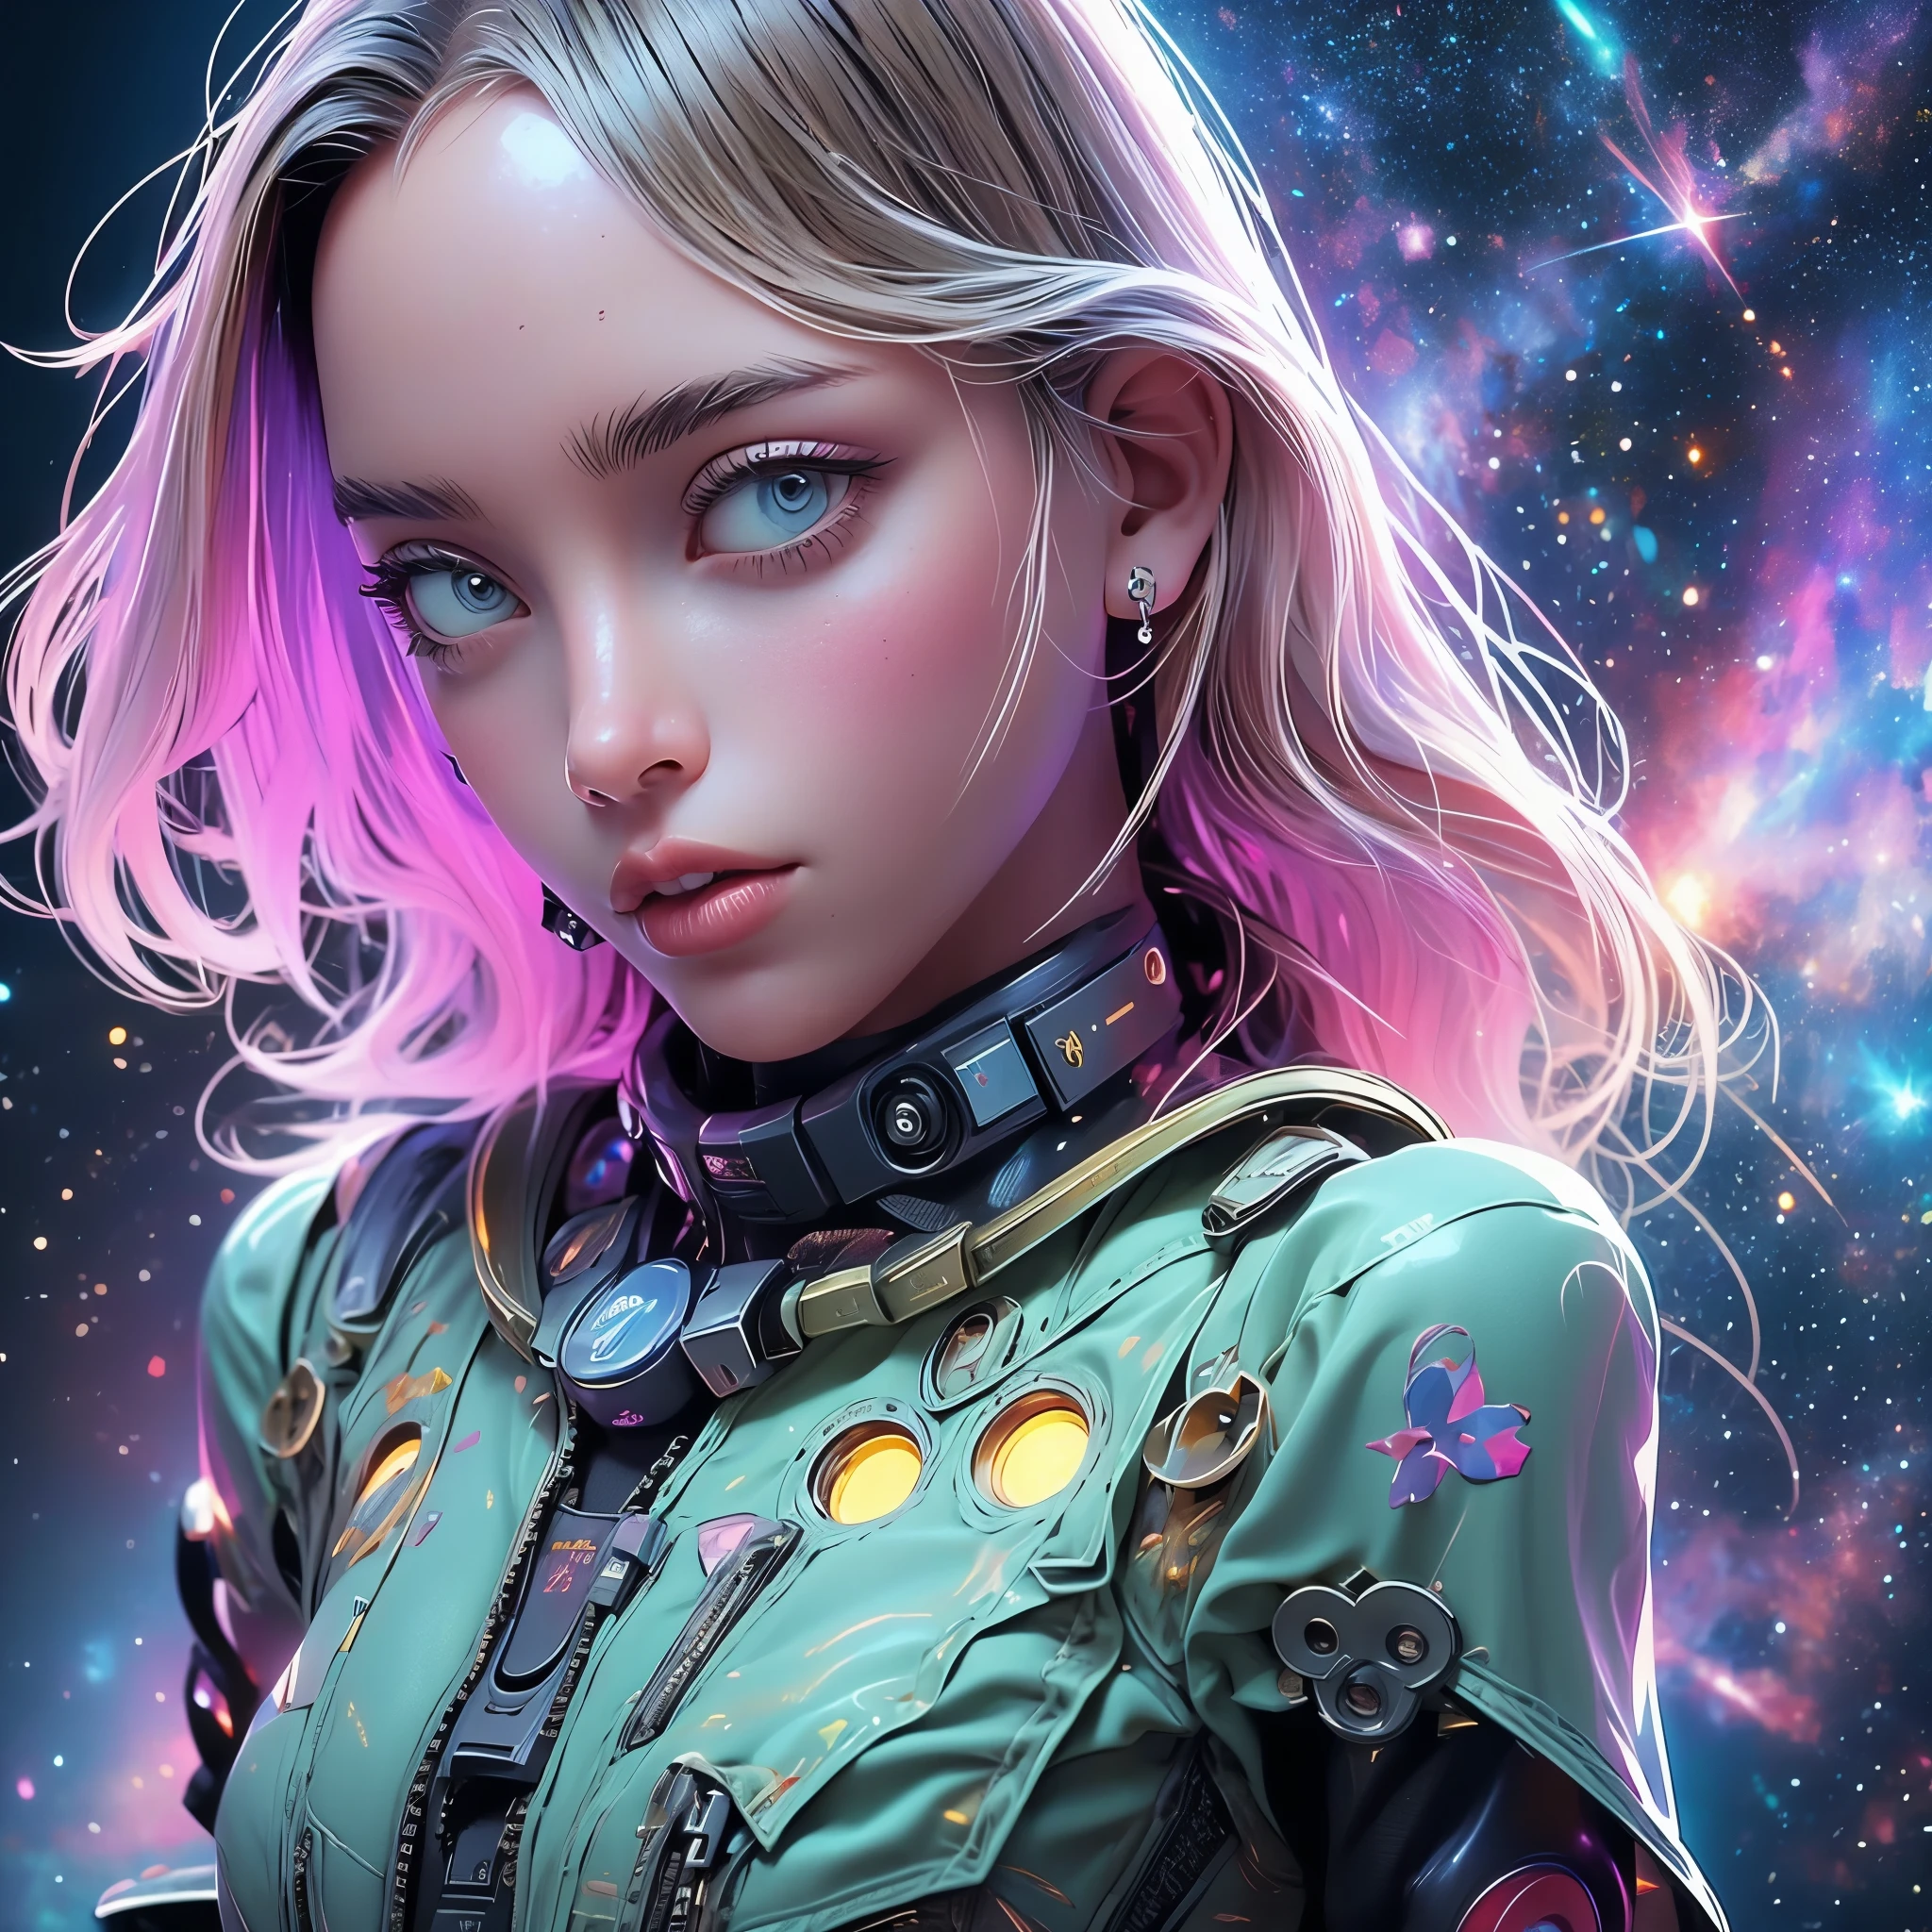 there is a screenshot of a woman in a space suit, a cosmic girl, an event, cosmic entity, incriminate content details, an endless cosmos in the background, historical event, real event, an astral background, cosmic background, cosmic goddess, cyborg goddess in cosmos, celestial cosmos, game interface, violet battlefield theme, cosmic style, hyperdetailed content, background details